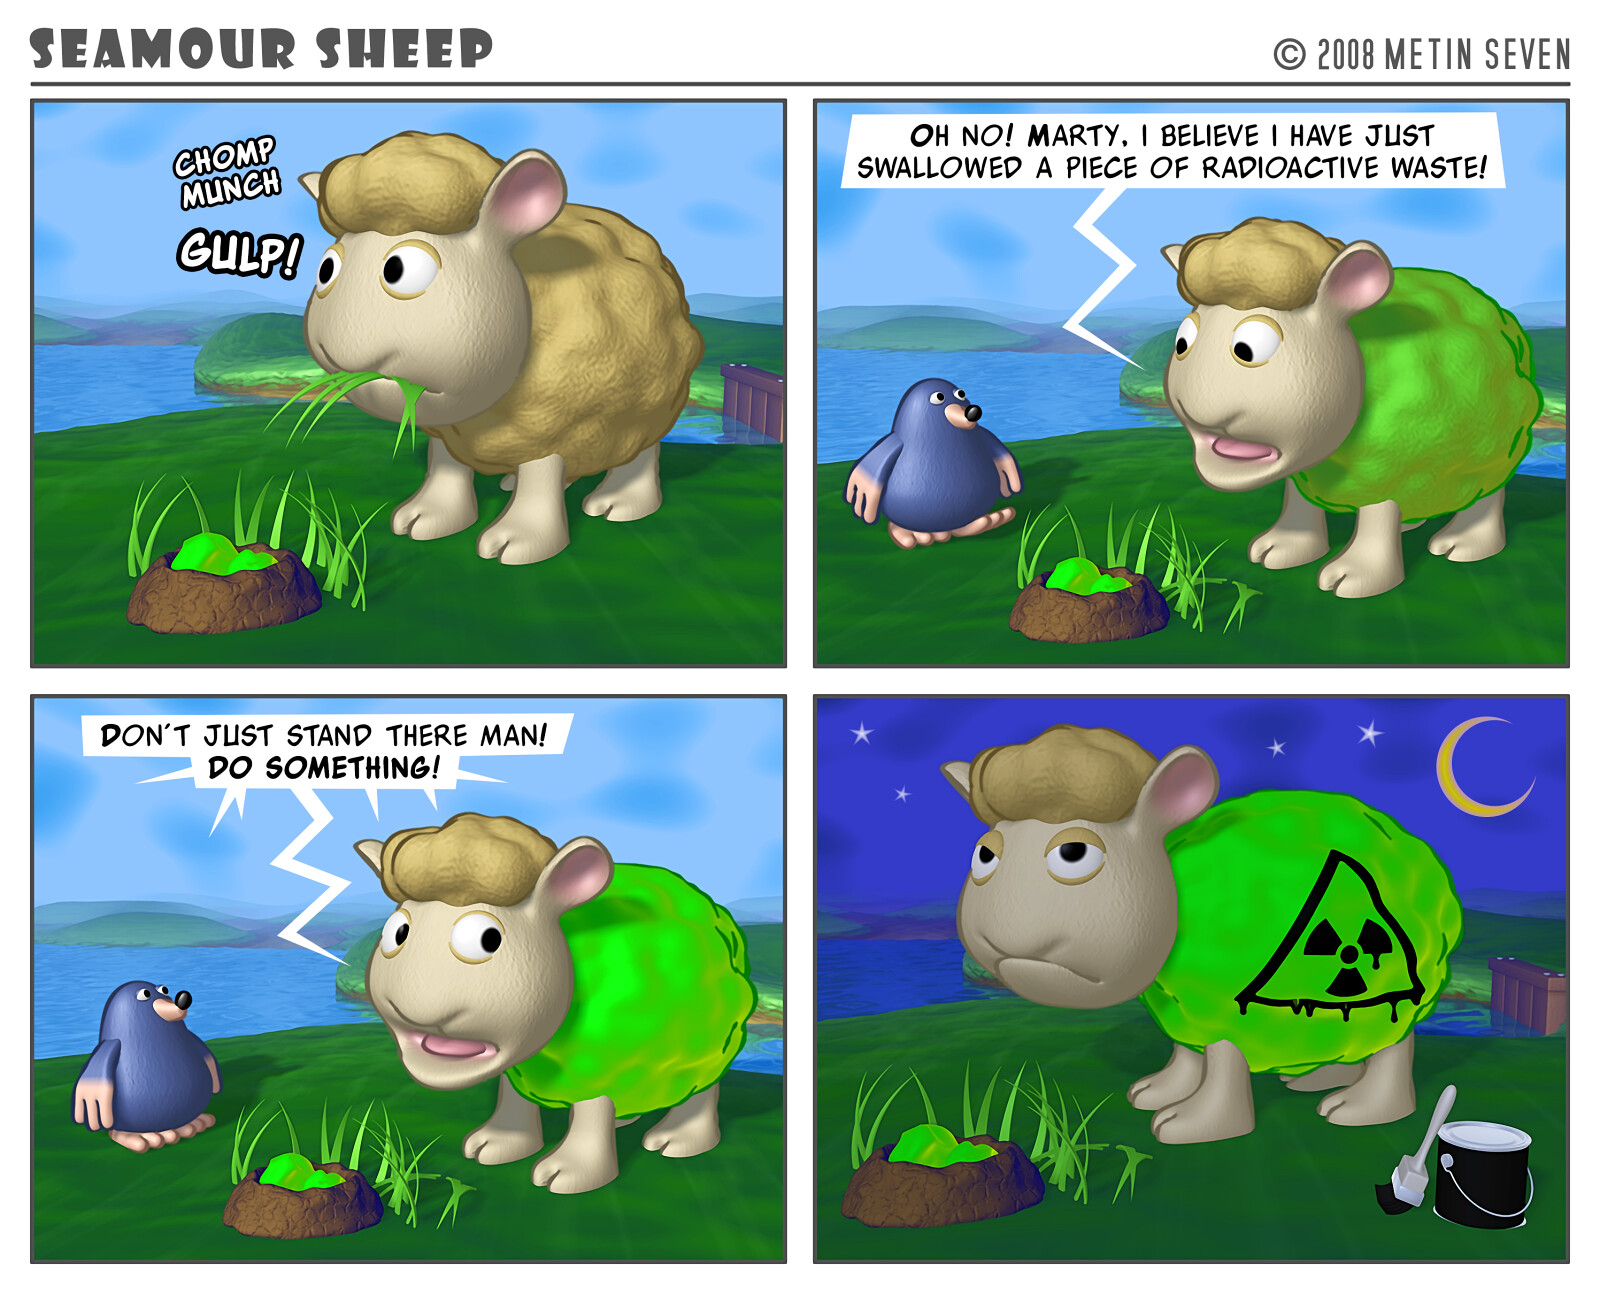 Seamour Sheep and Marty Mole comic strip episode: Radioactive